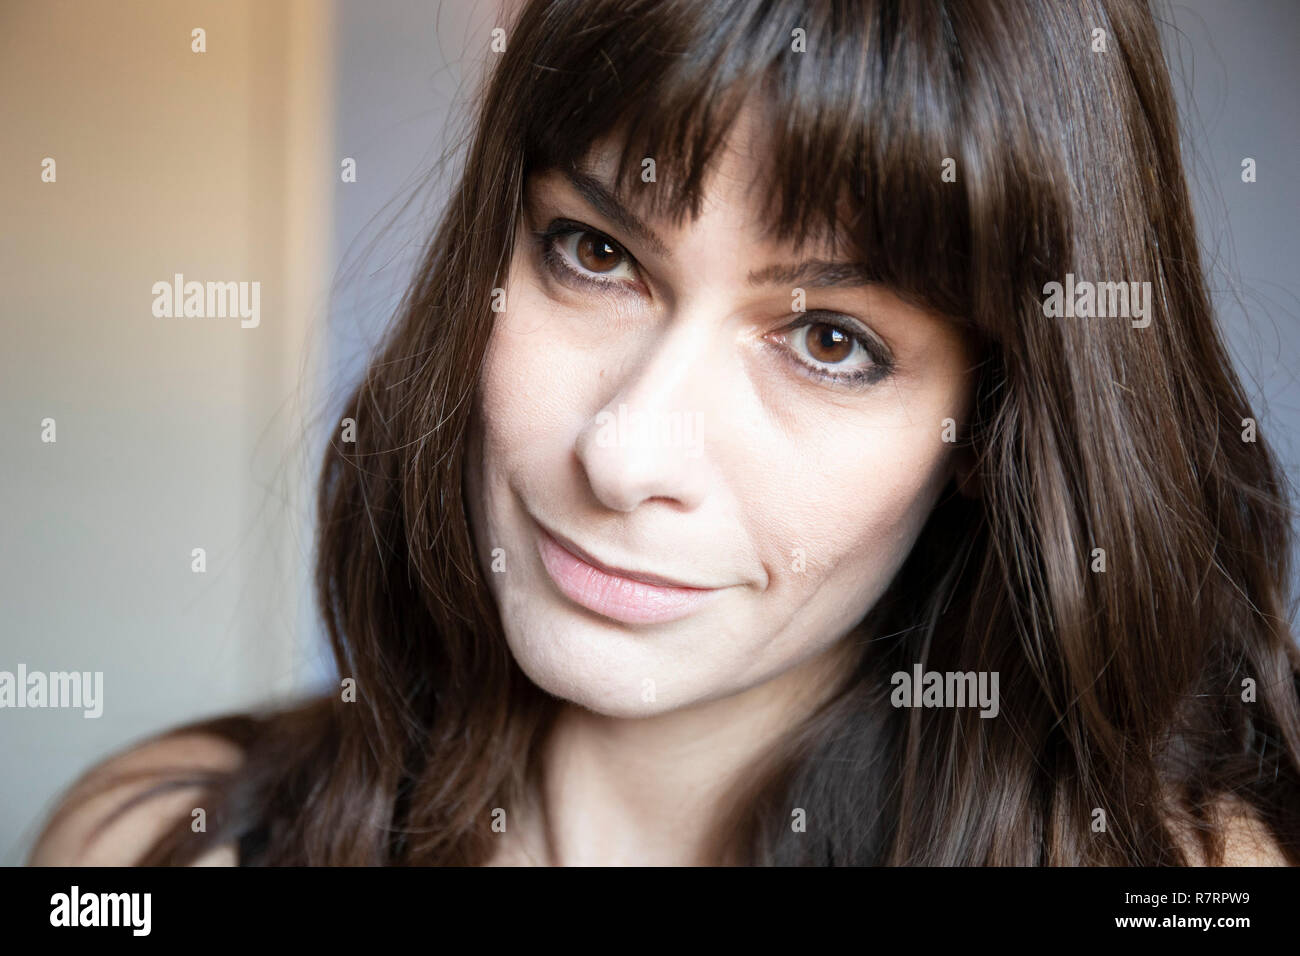 Young woman close-up portrait. Caucasian with brown long hair and bangs. Smiling expression, tilted head. Stock Photo